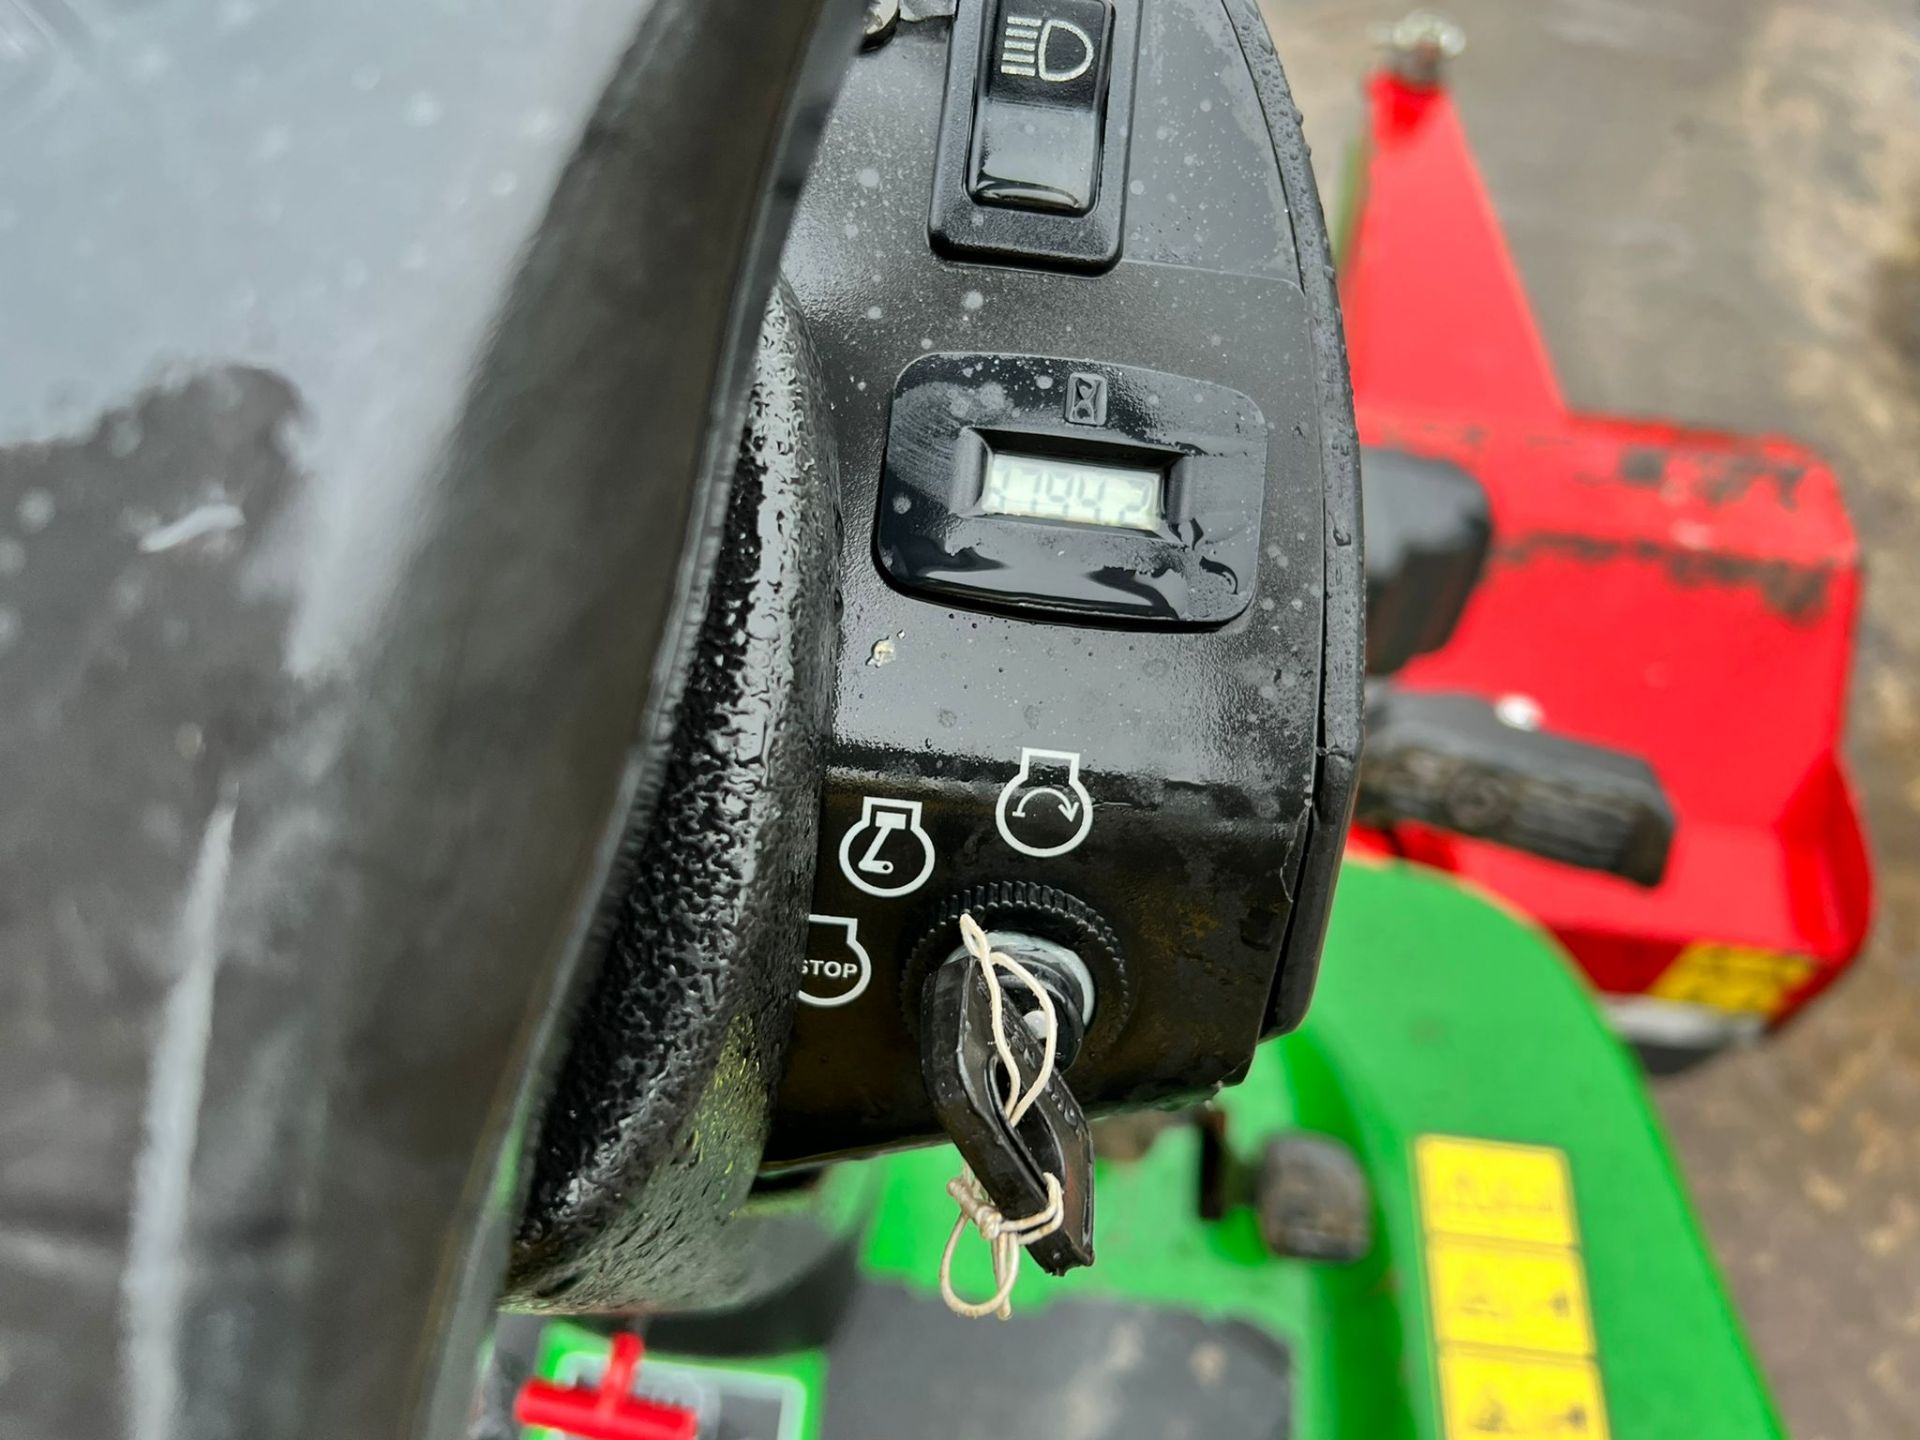 2009 JOHN DEERE 1445 4WD RIDE ON MOWER, RUNS DRIVES AND CUTS, SHOWING A LOW 3794 HOURS *PLUS VAT* - Image 9 of 13